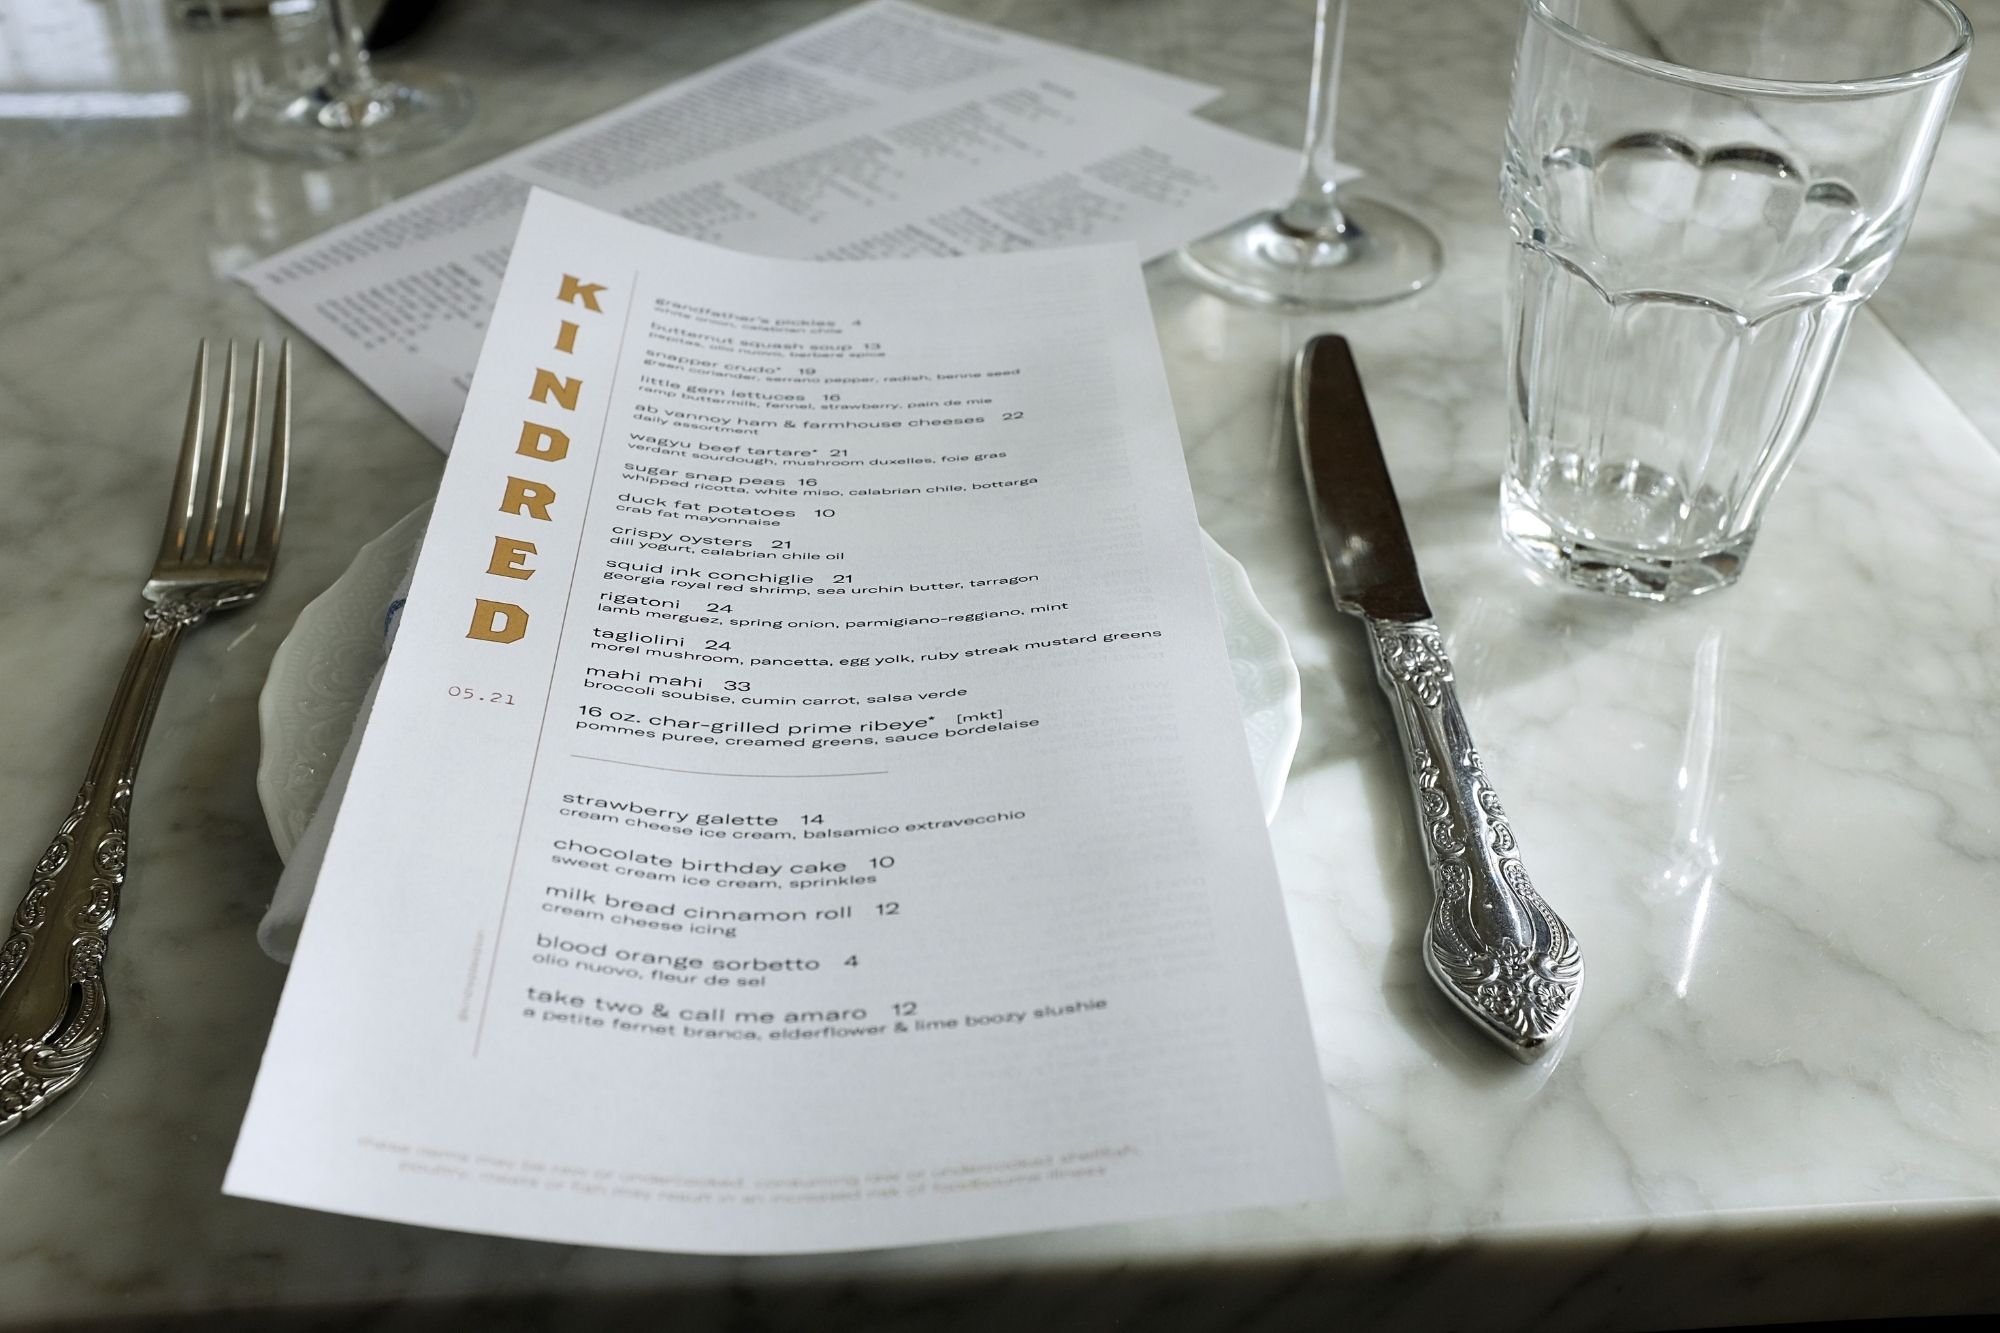 Menu on the table at Kindred